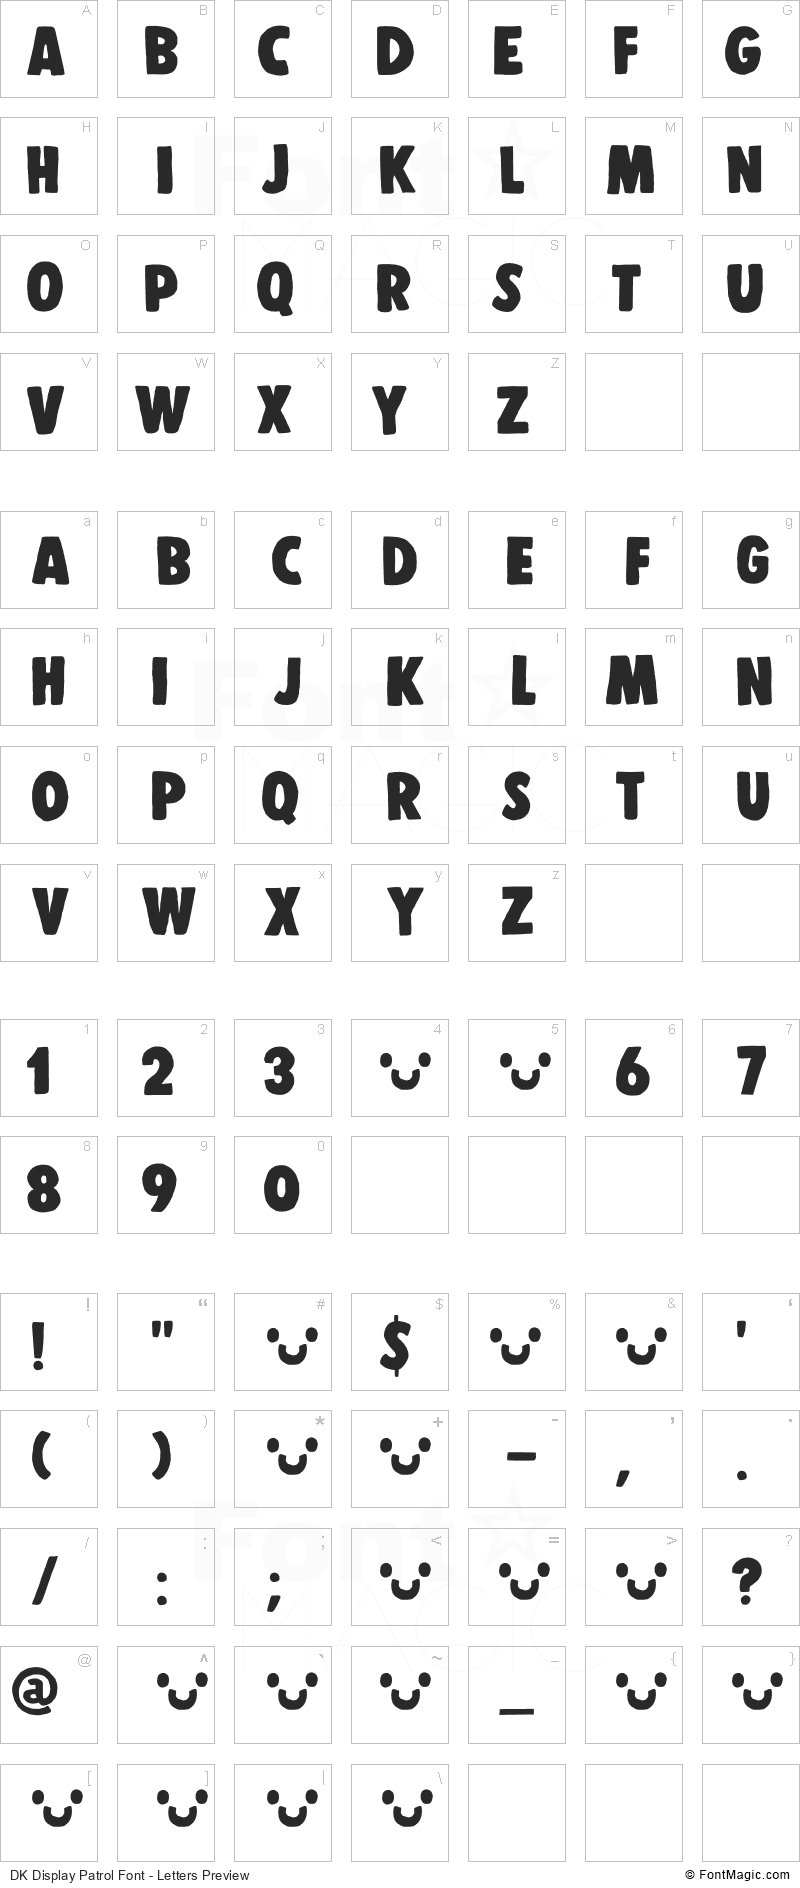 DK Display Patrol Font - All Latters Preview Chart